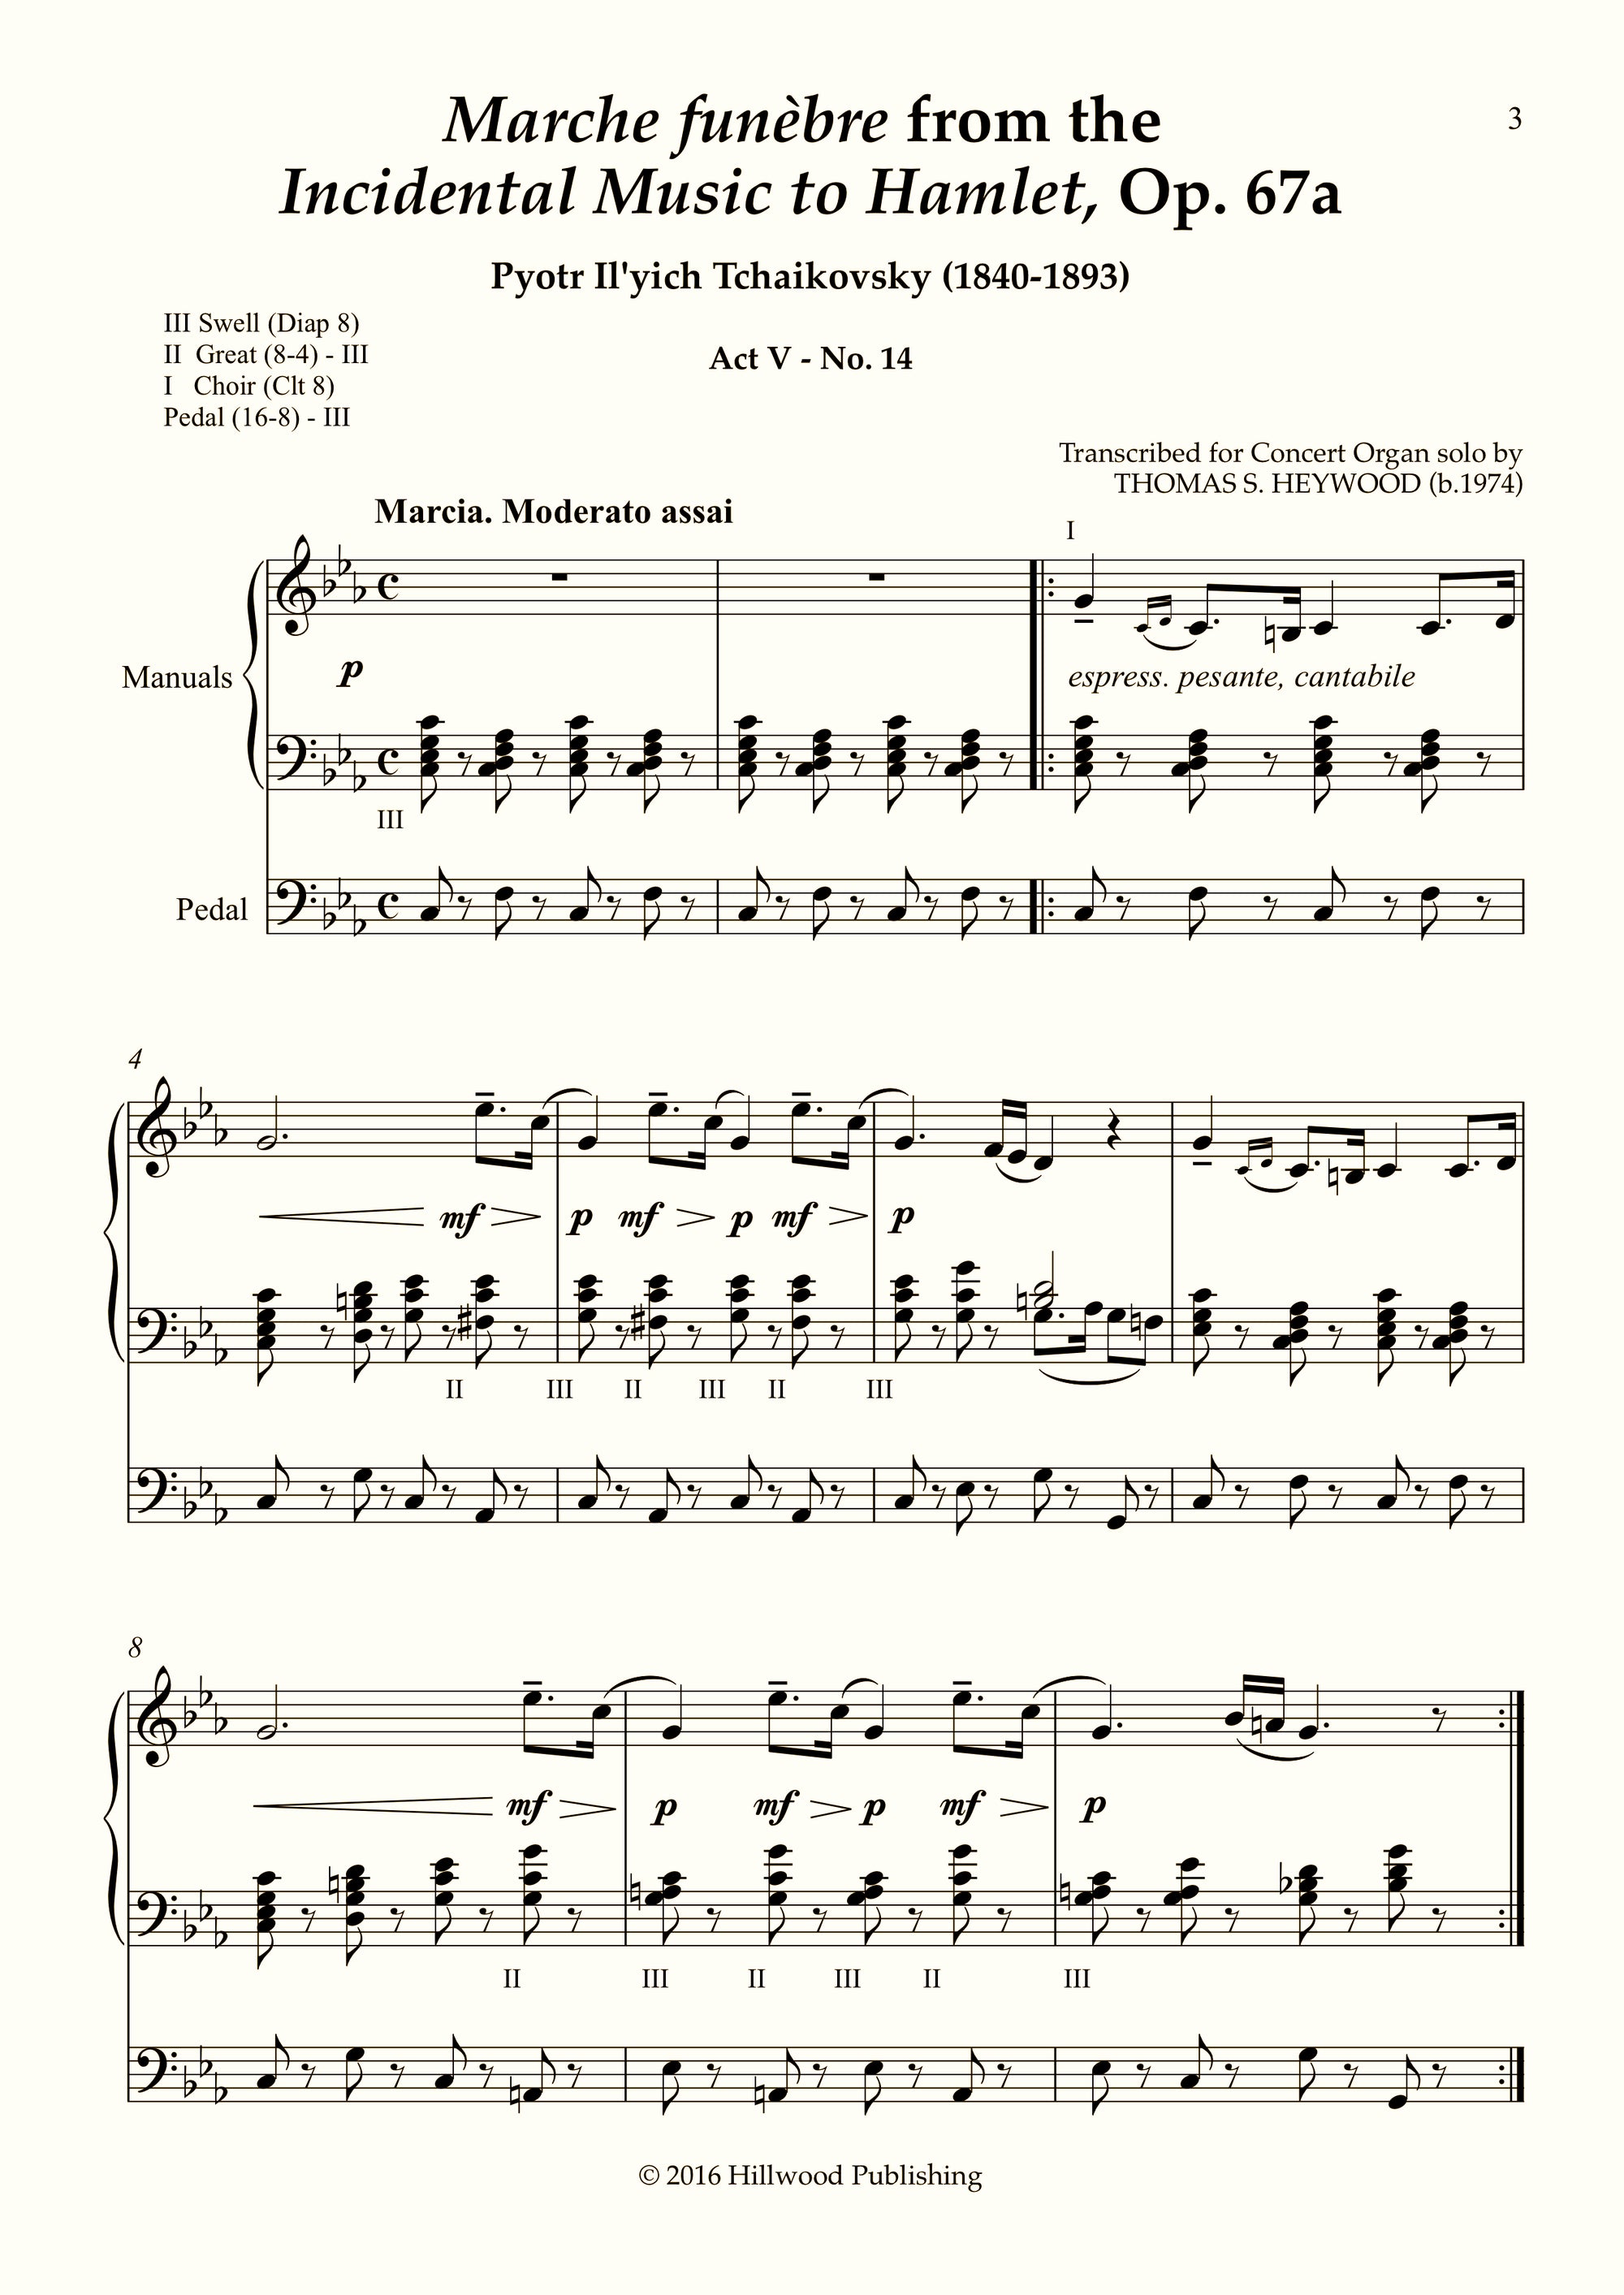 Tchaikovsky/Heywood - Marche funèbre from the Incidental Music to Hamlet, Op. 67a (Score)